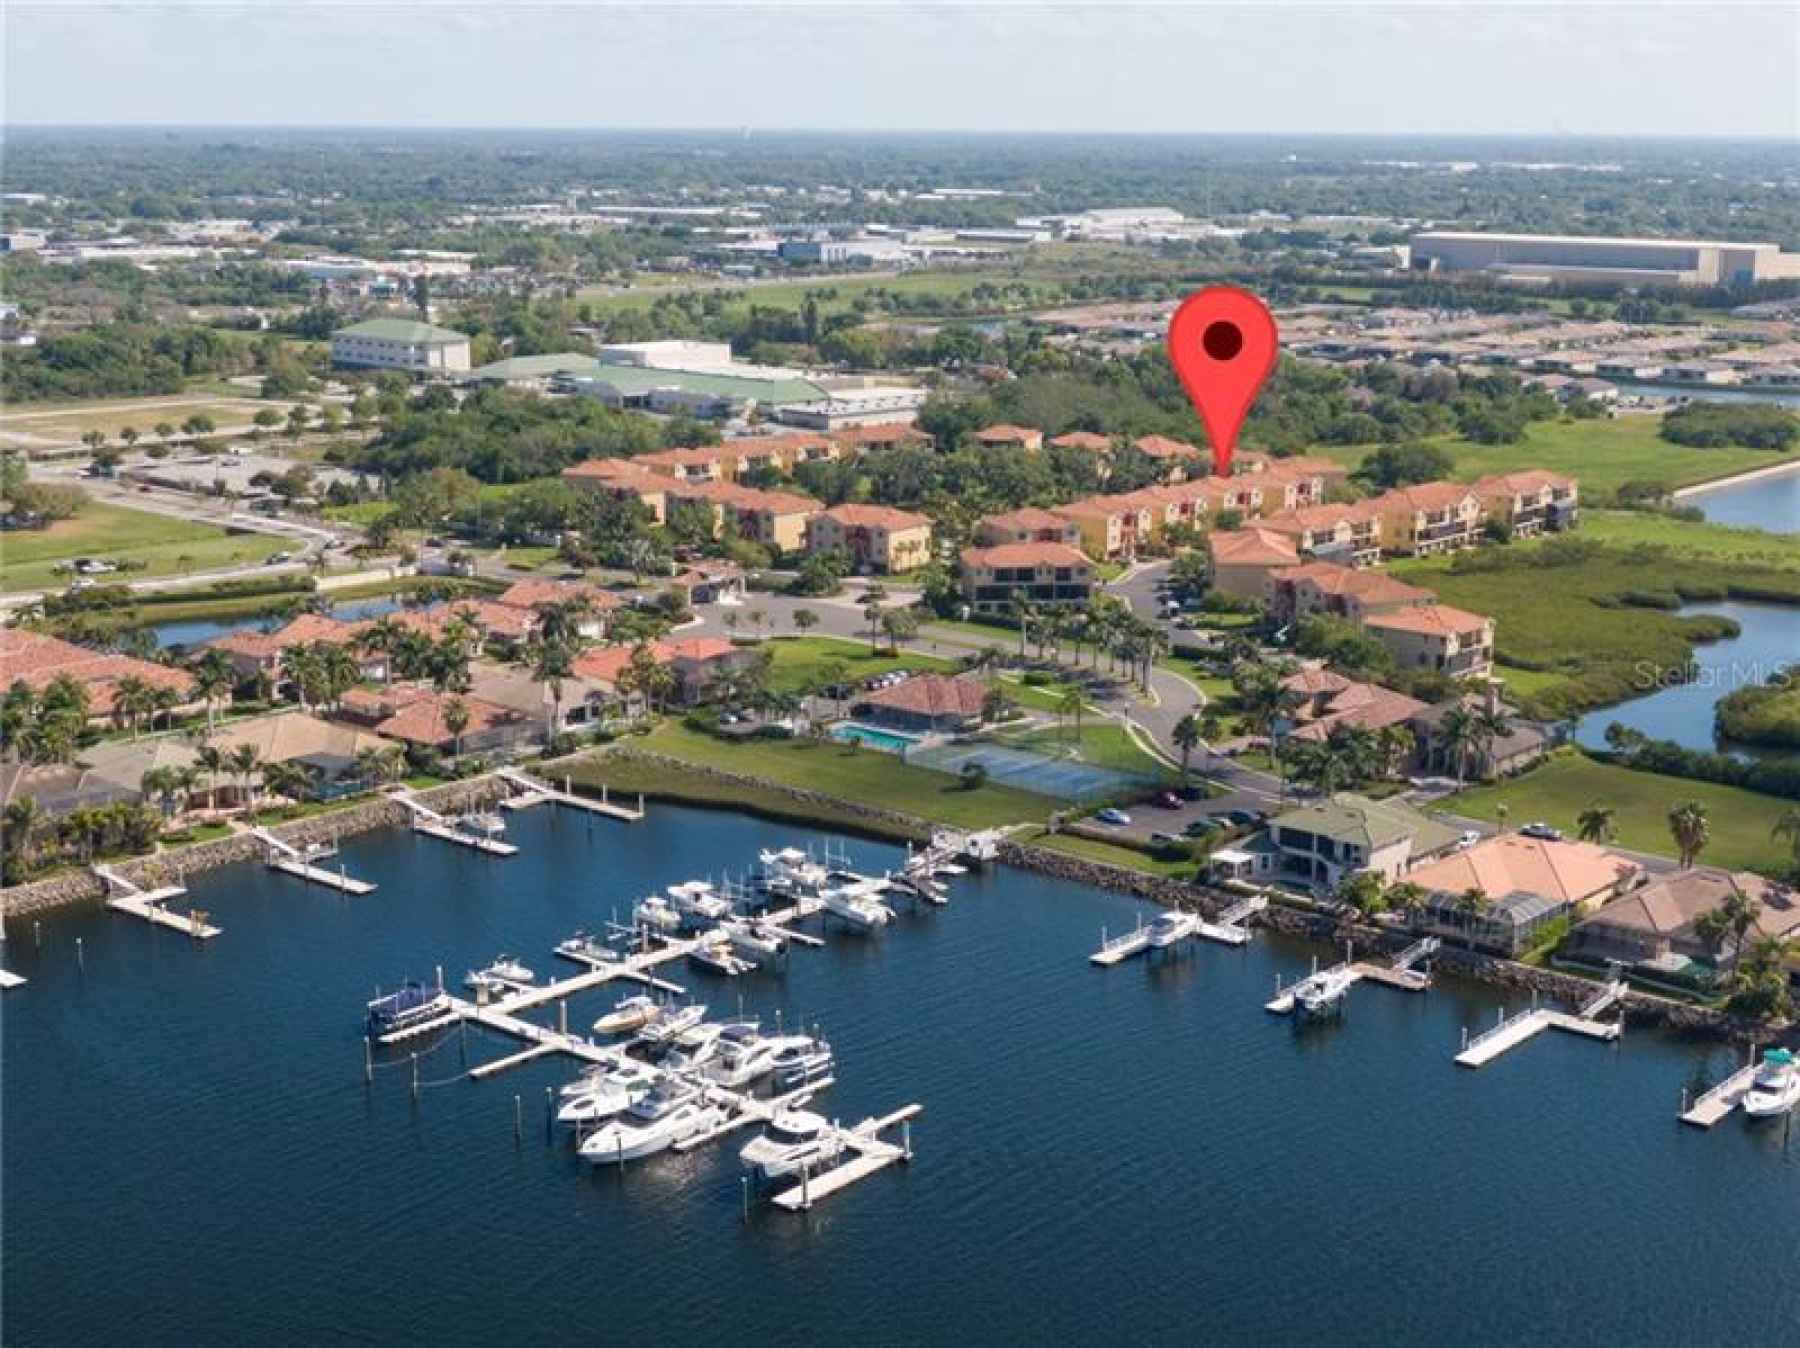 The townhome is located new docks and Manatee Bay